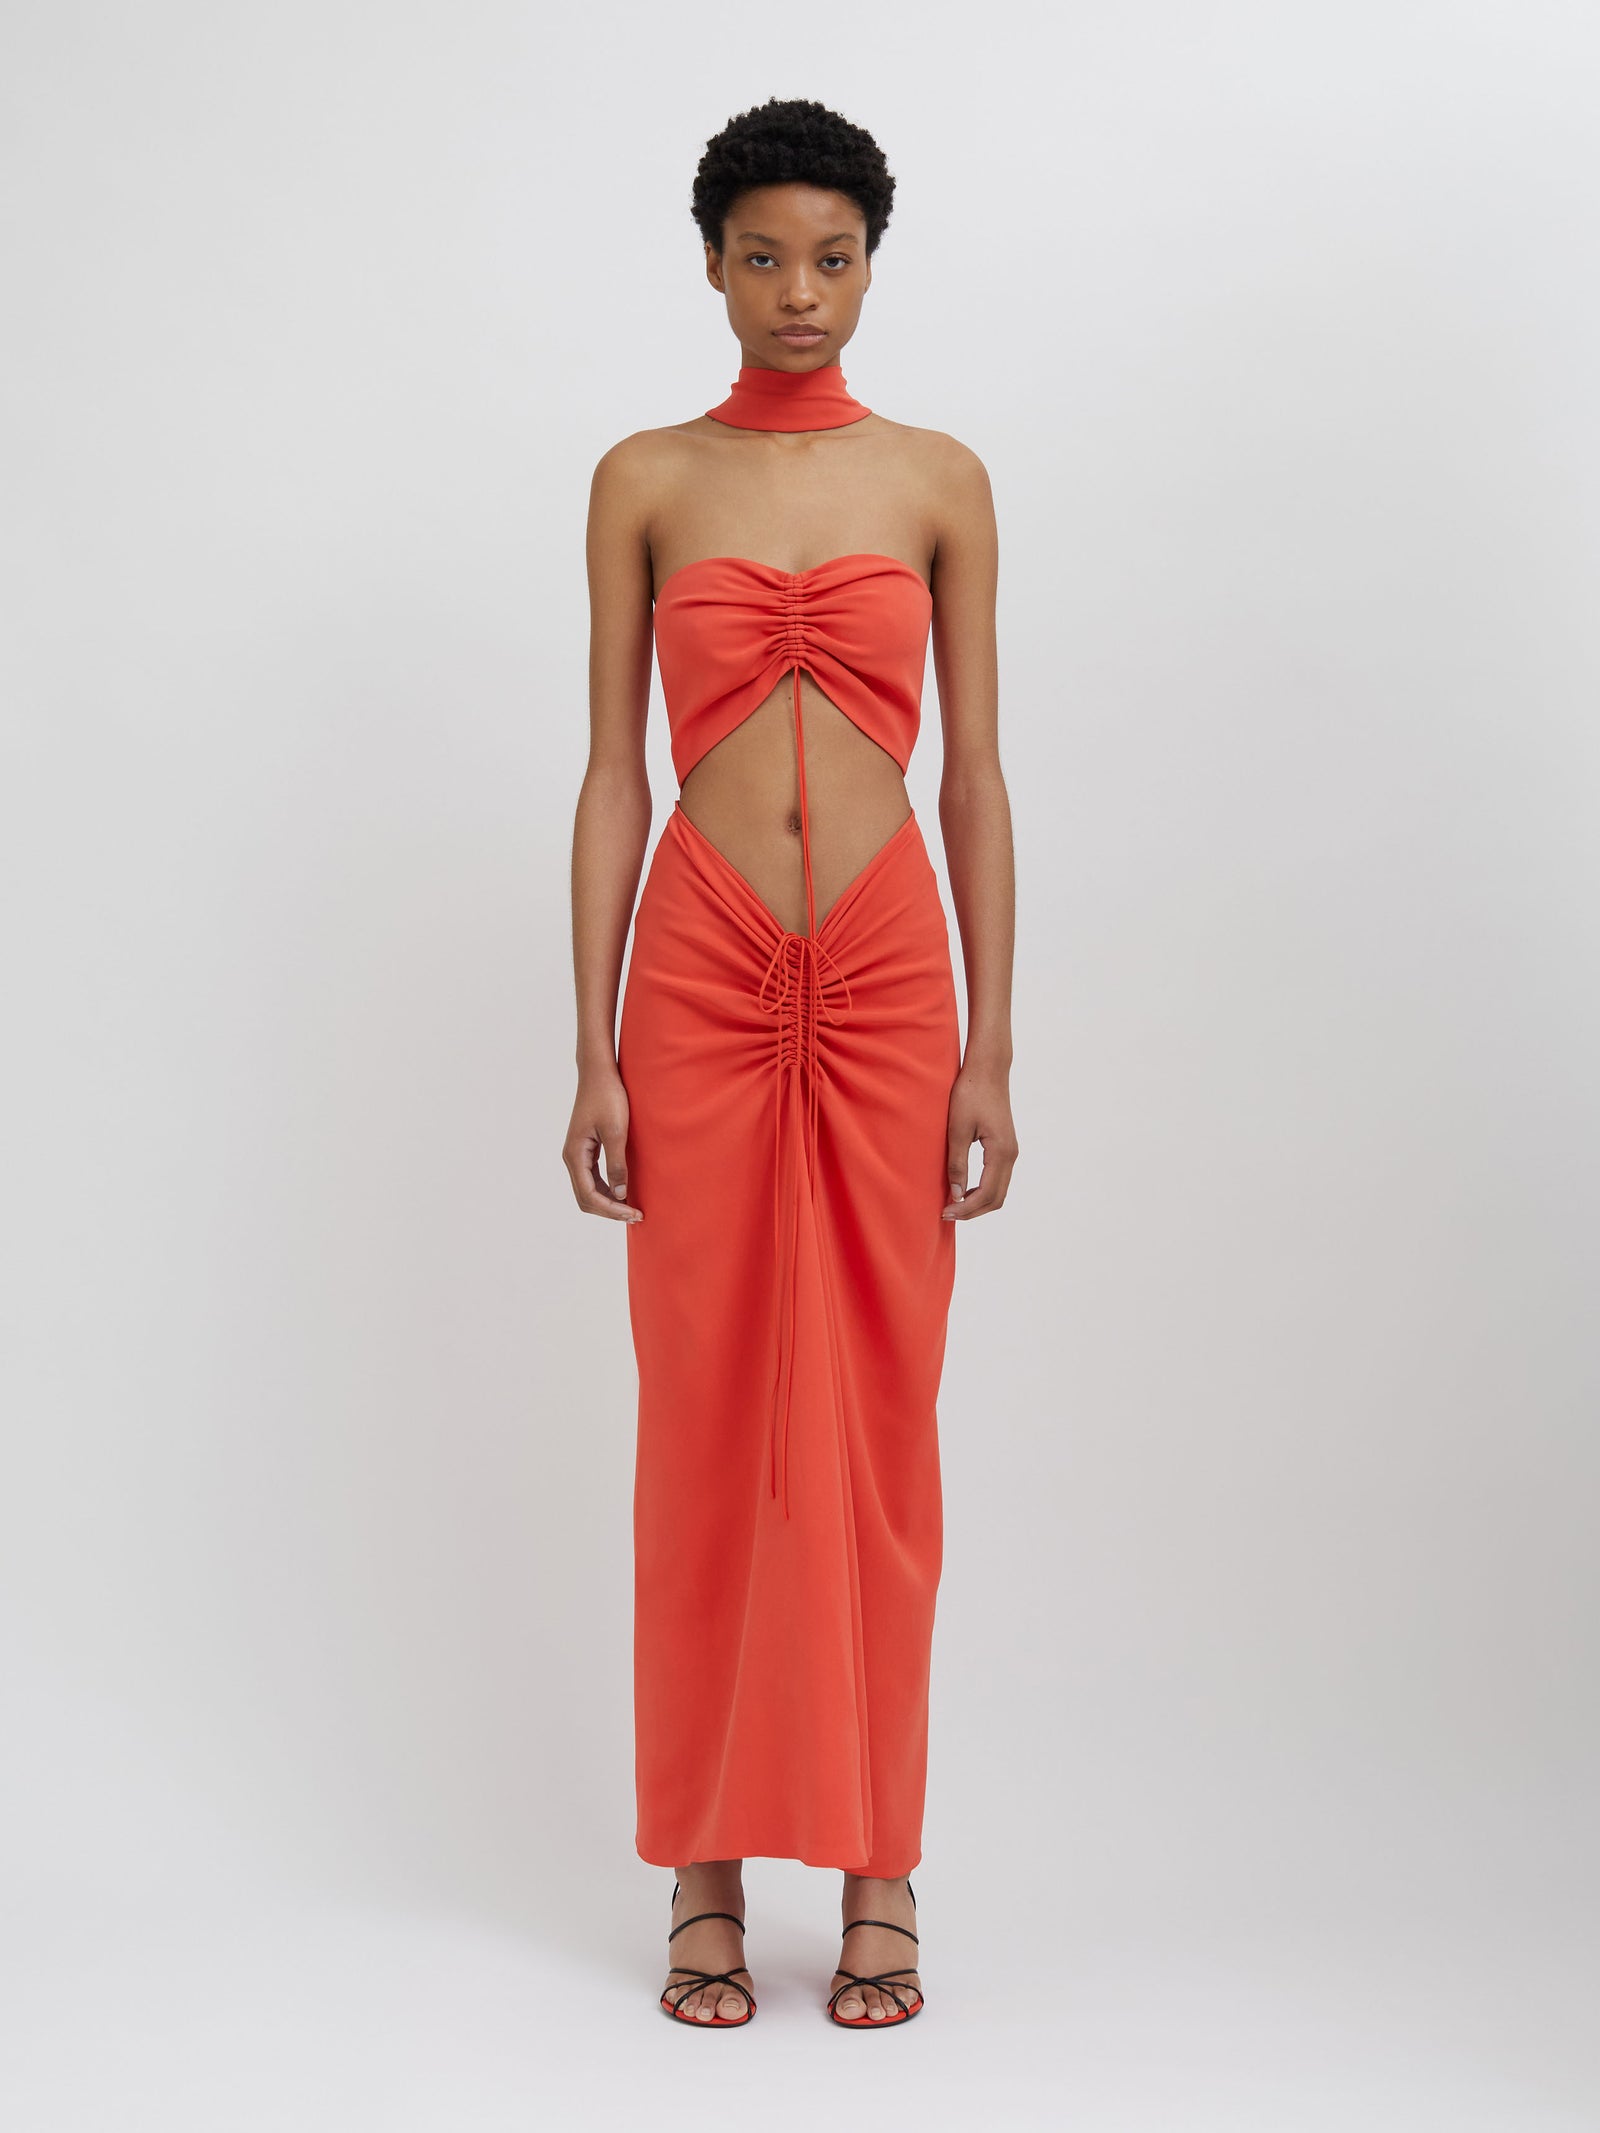 Reversed Halter Disconnect Ruched Dress